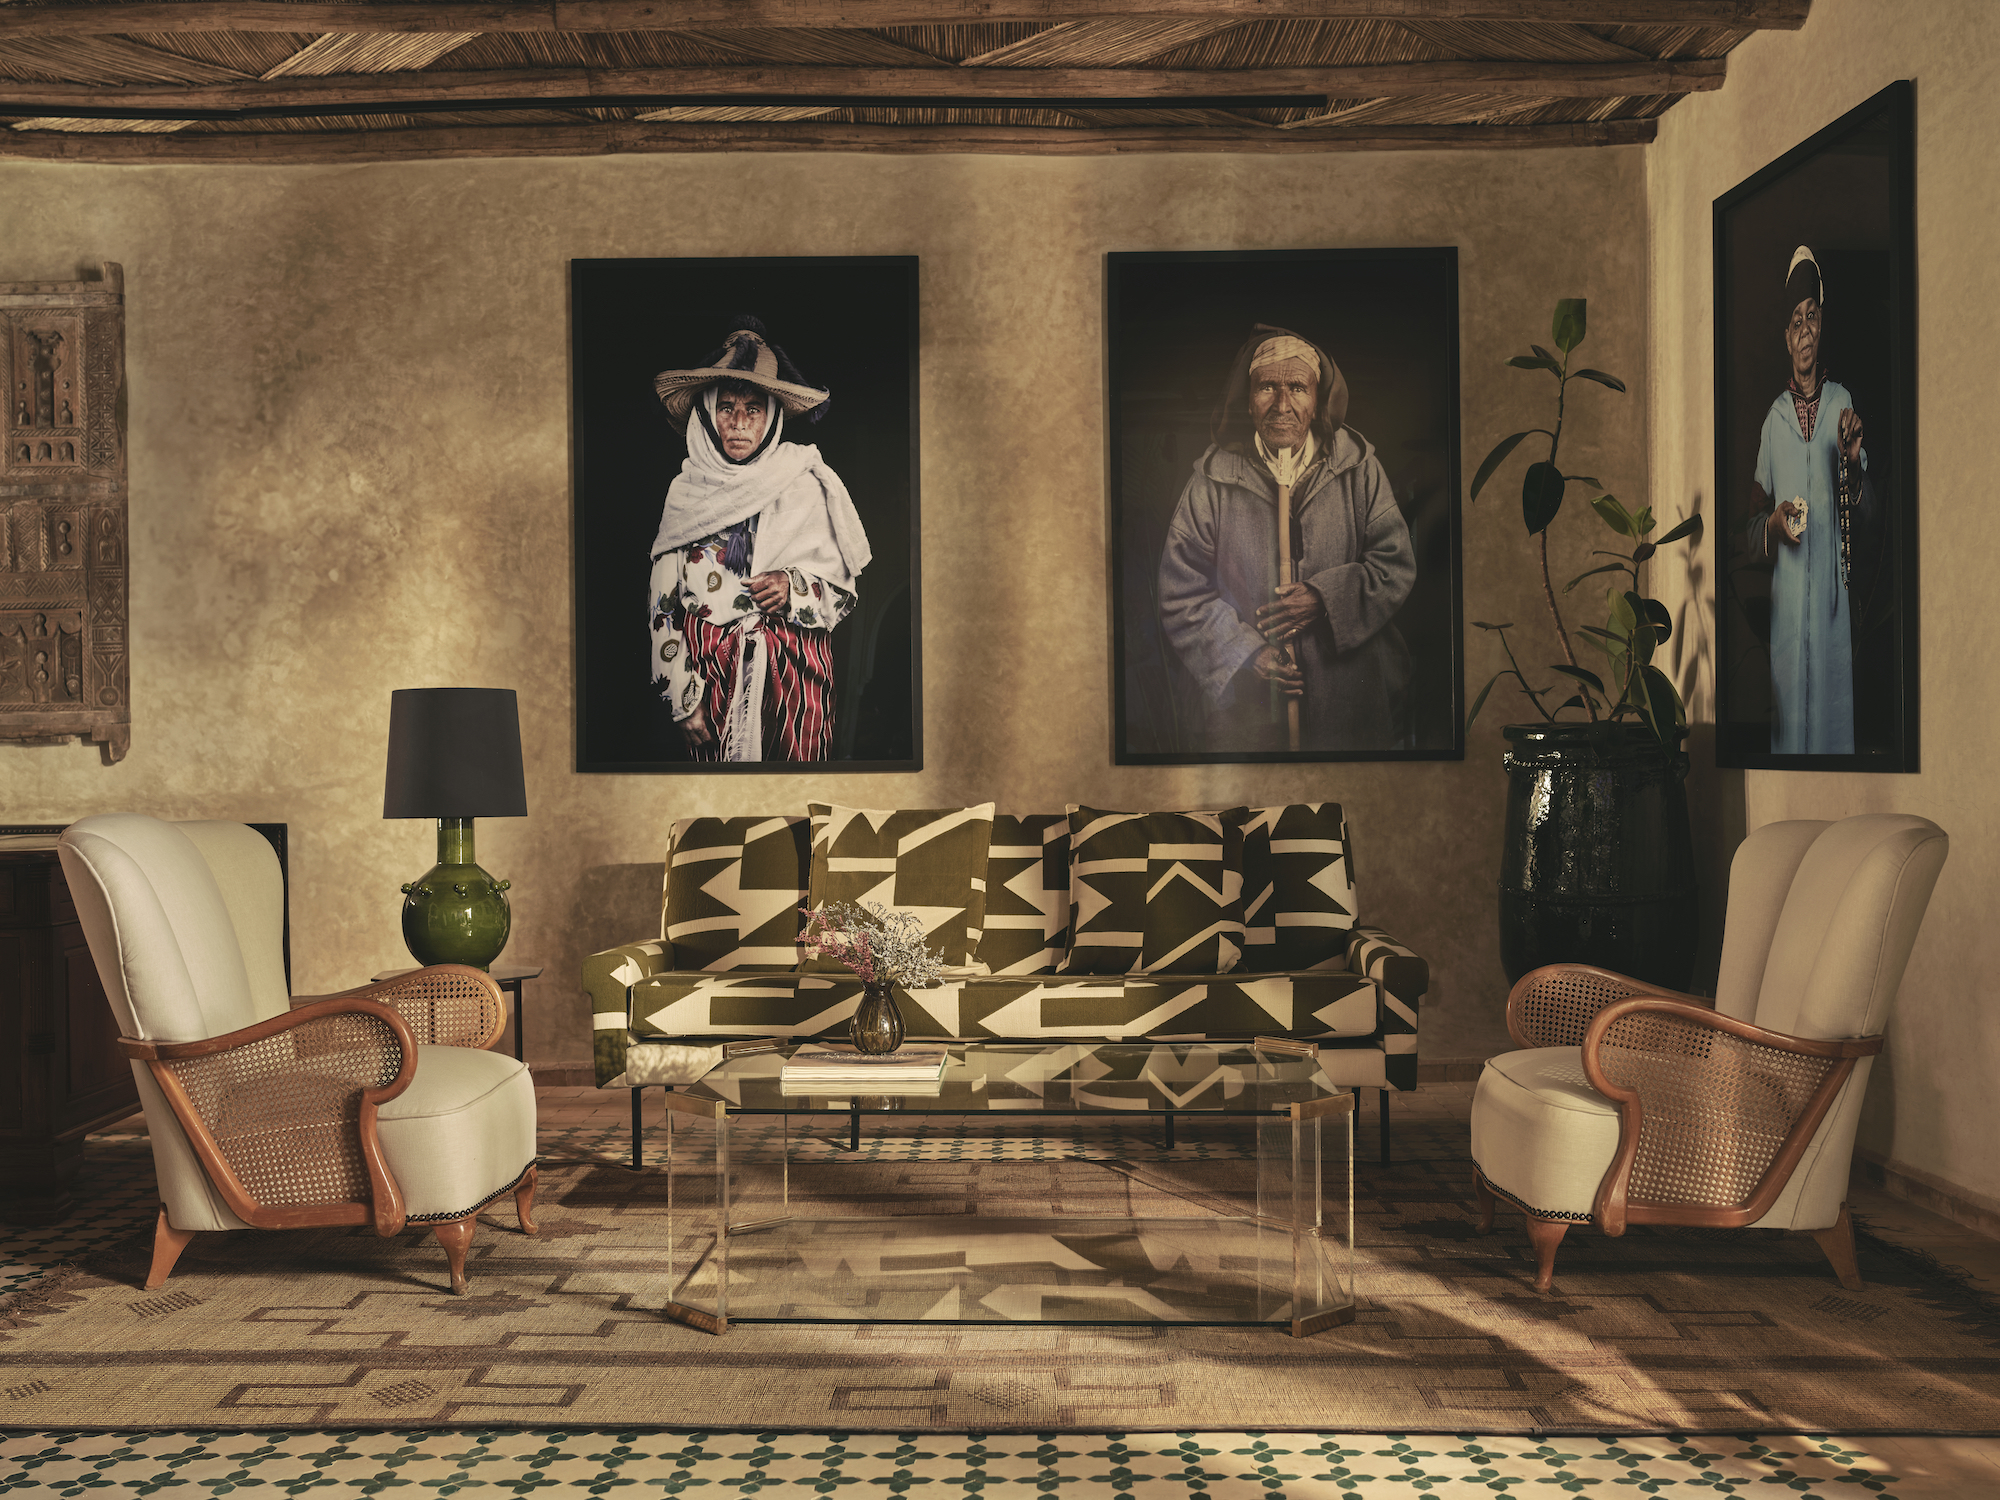 The reception area of Izza hotel in Marrekesh with works from the Les Marocains series by Leila Alaoui - Effect Magazine